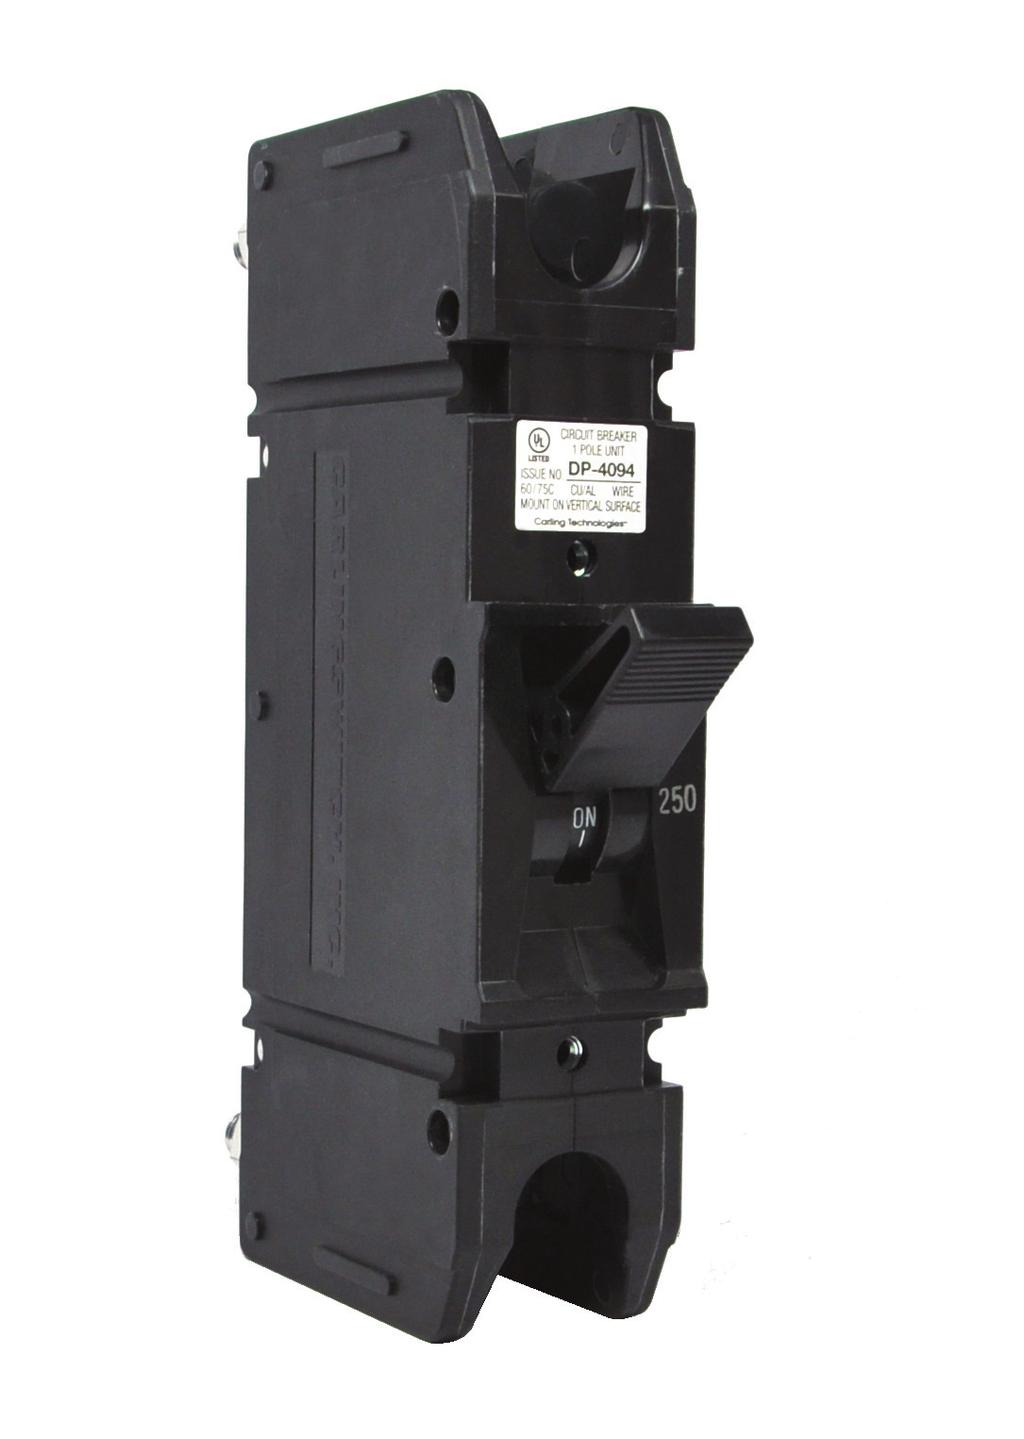 Additionally, the F-Series circuit breakers come with a choice of overload time delays, making them ideal for critical